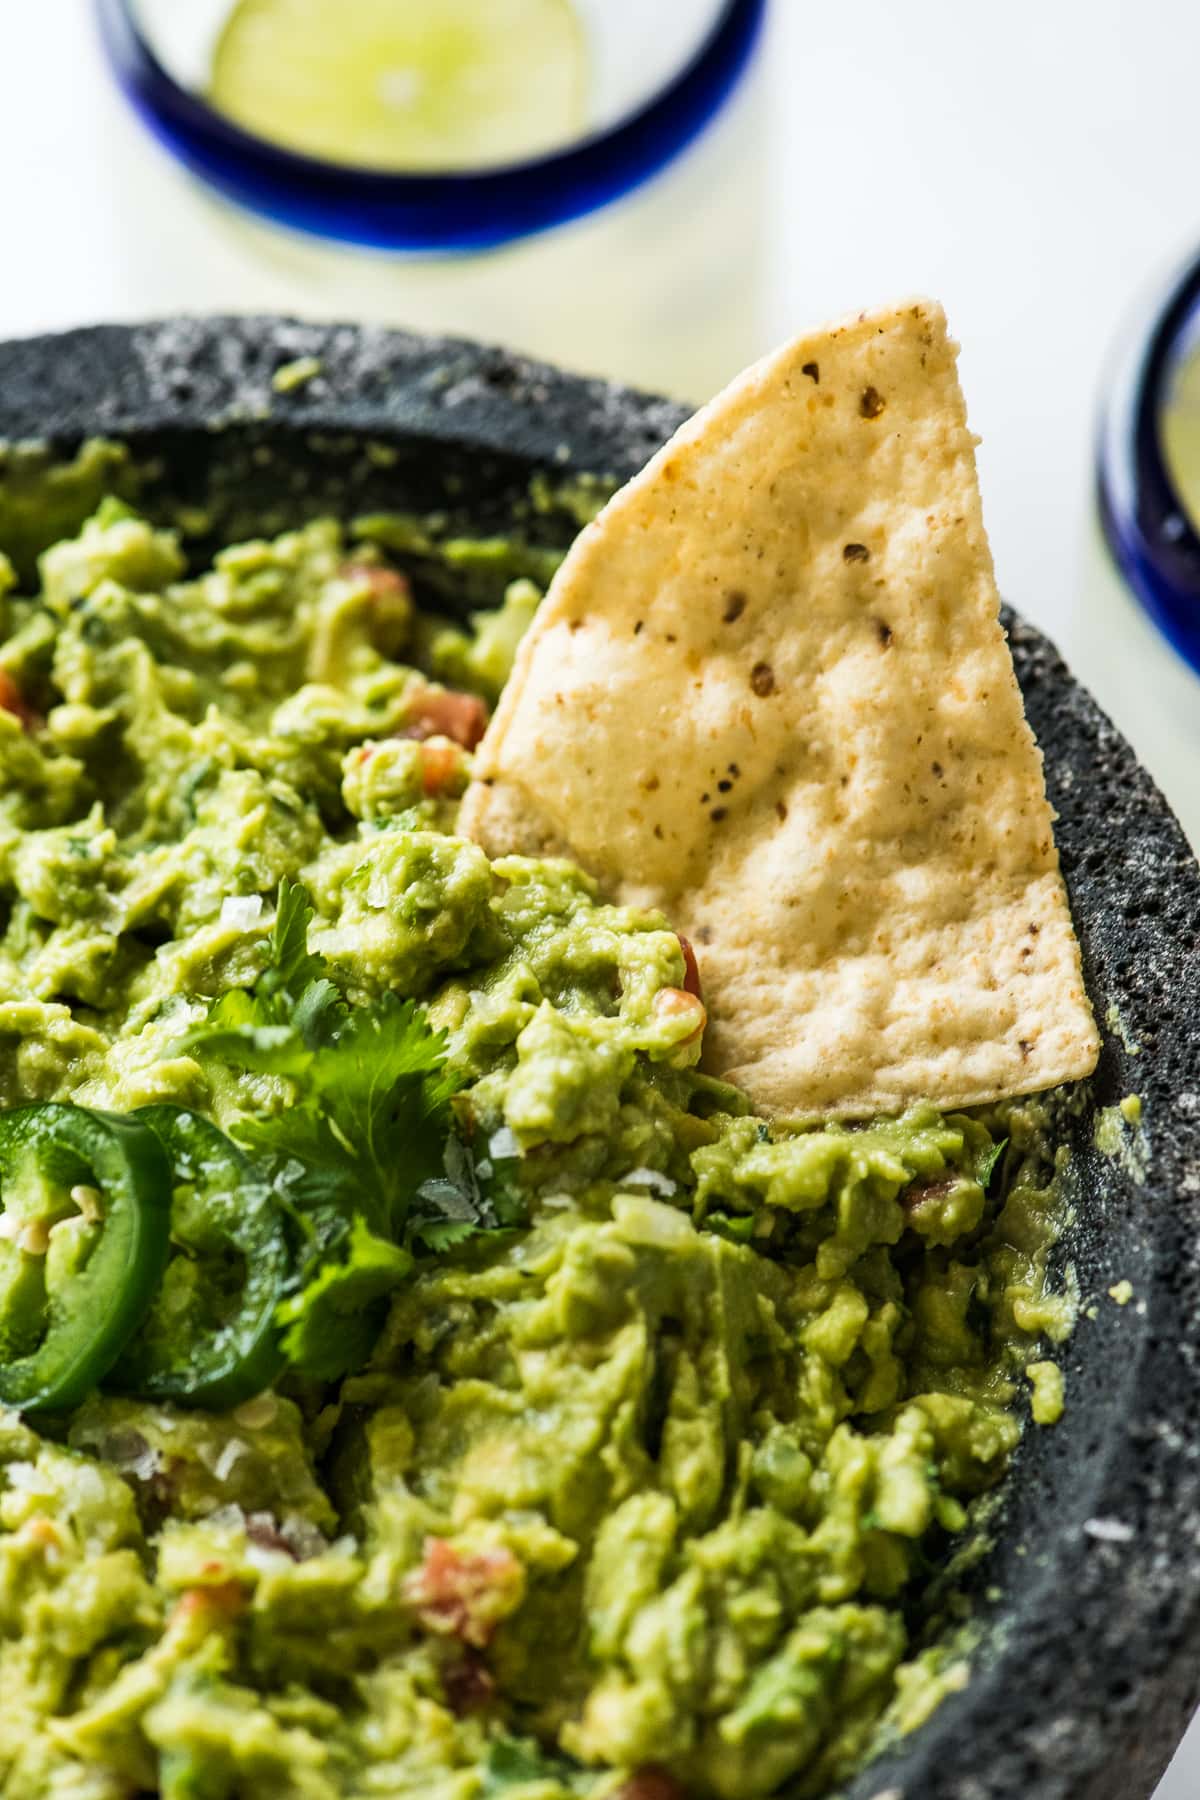 A tortilla chip being dipped in guacamole.